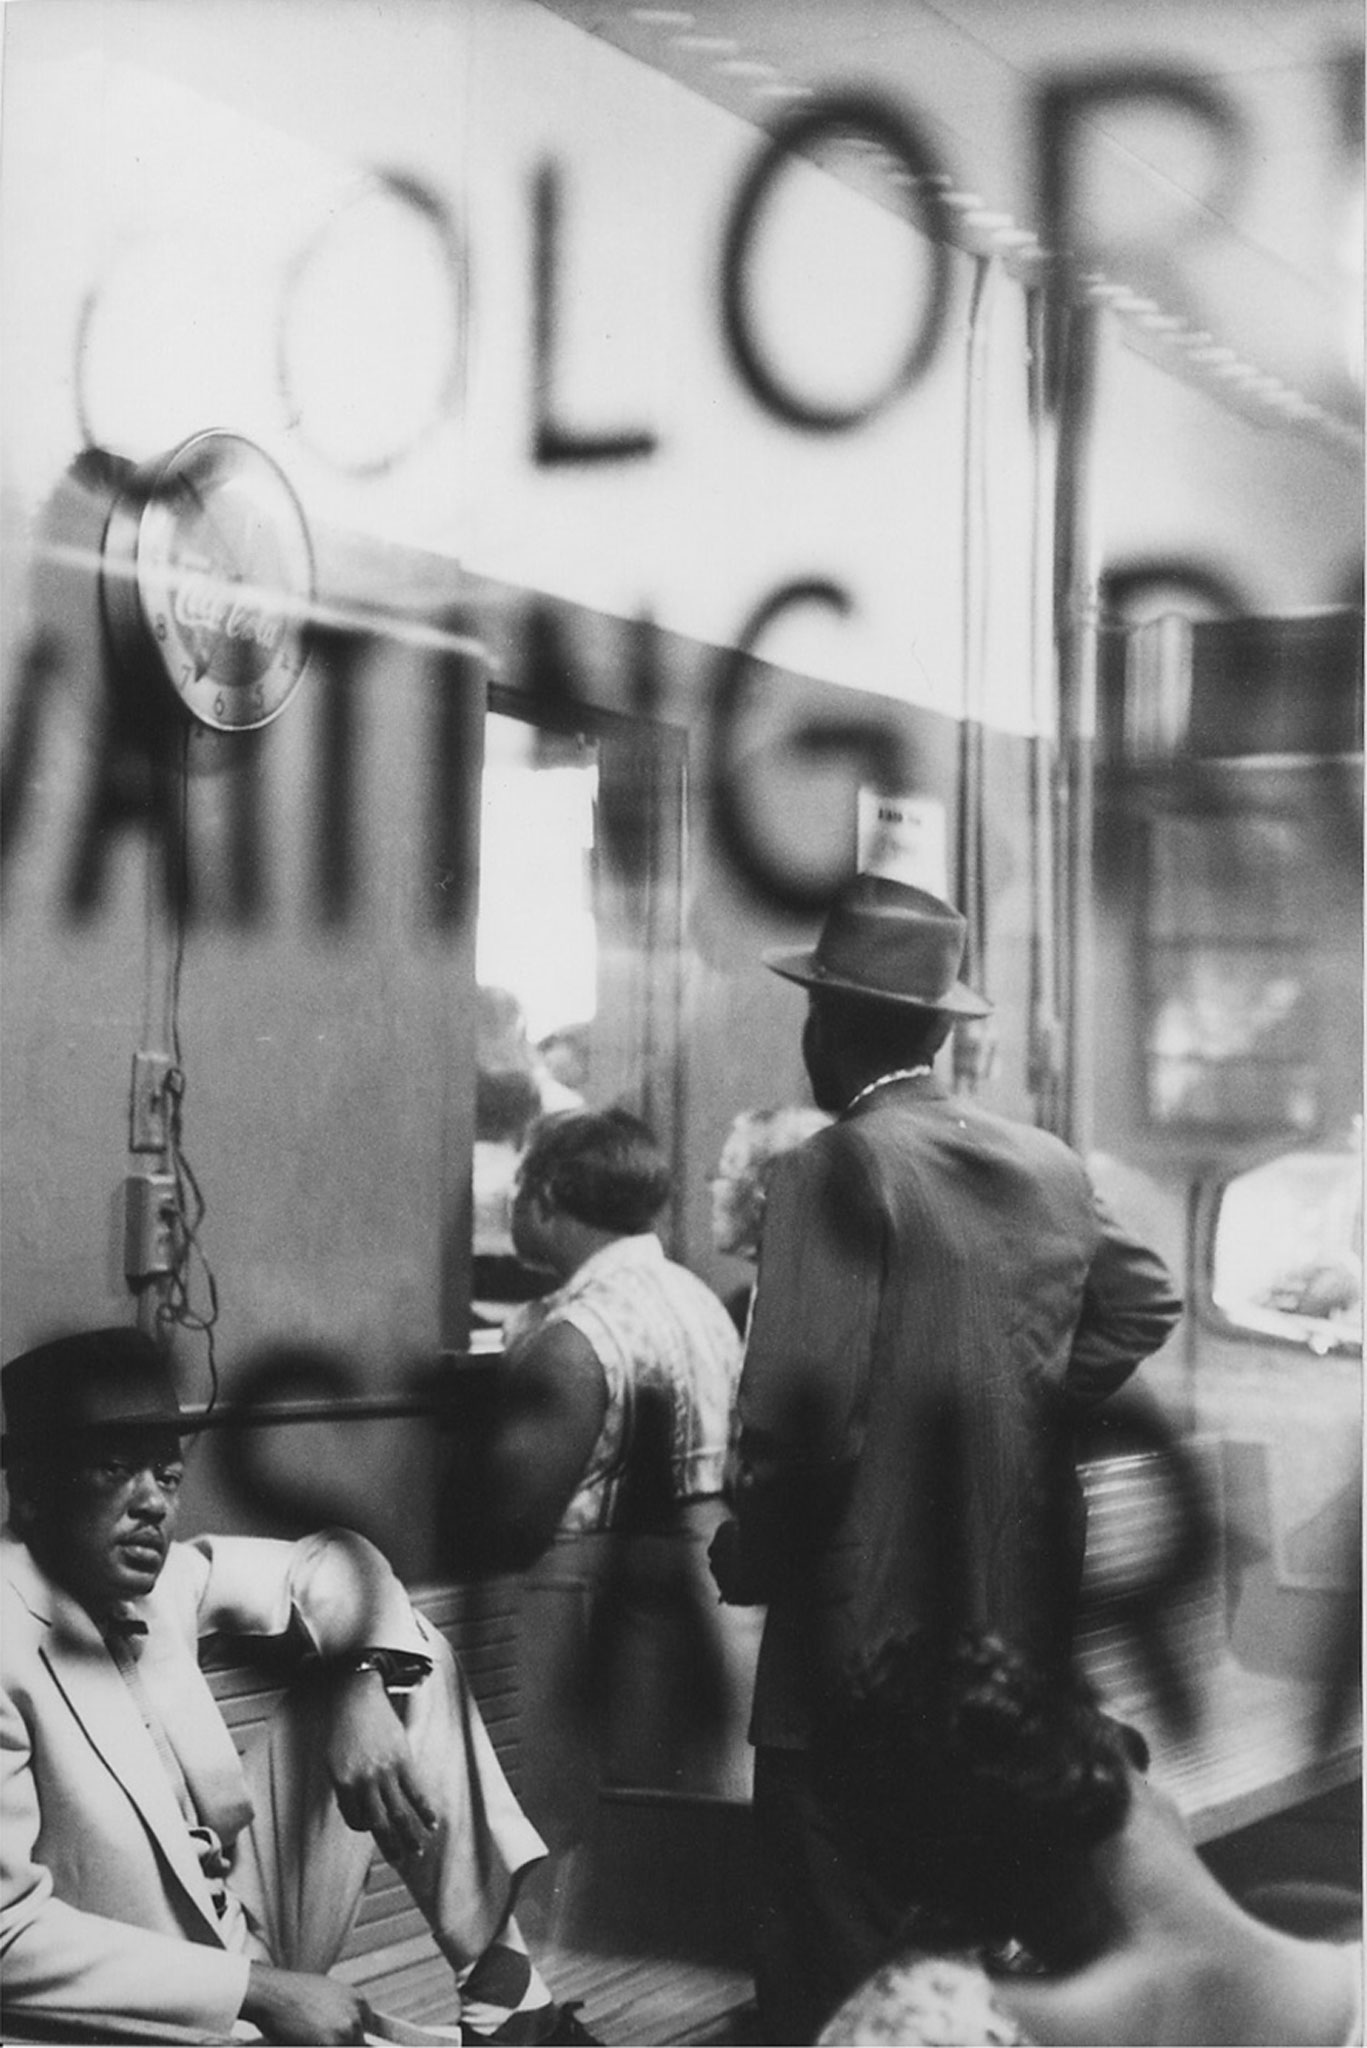 Freedom Riders wait in a 'Colored Waiting Room' in a bus station in Montgomery, Ala., May 1961. The Freedom Riders rode buses throughout the south in the months following the Boynton v. Virginia Supreme Court case, which outlawed racial segregation on public transportation, in order to test and call attention to still existing local policies that ran contrary to national laws.